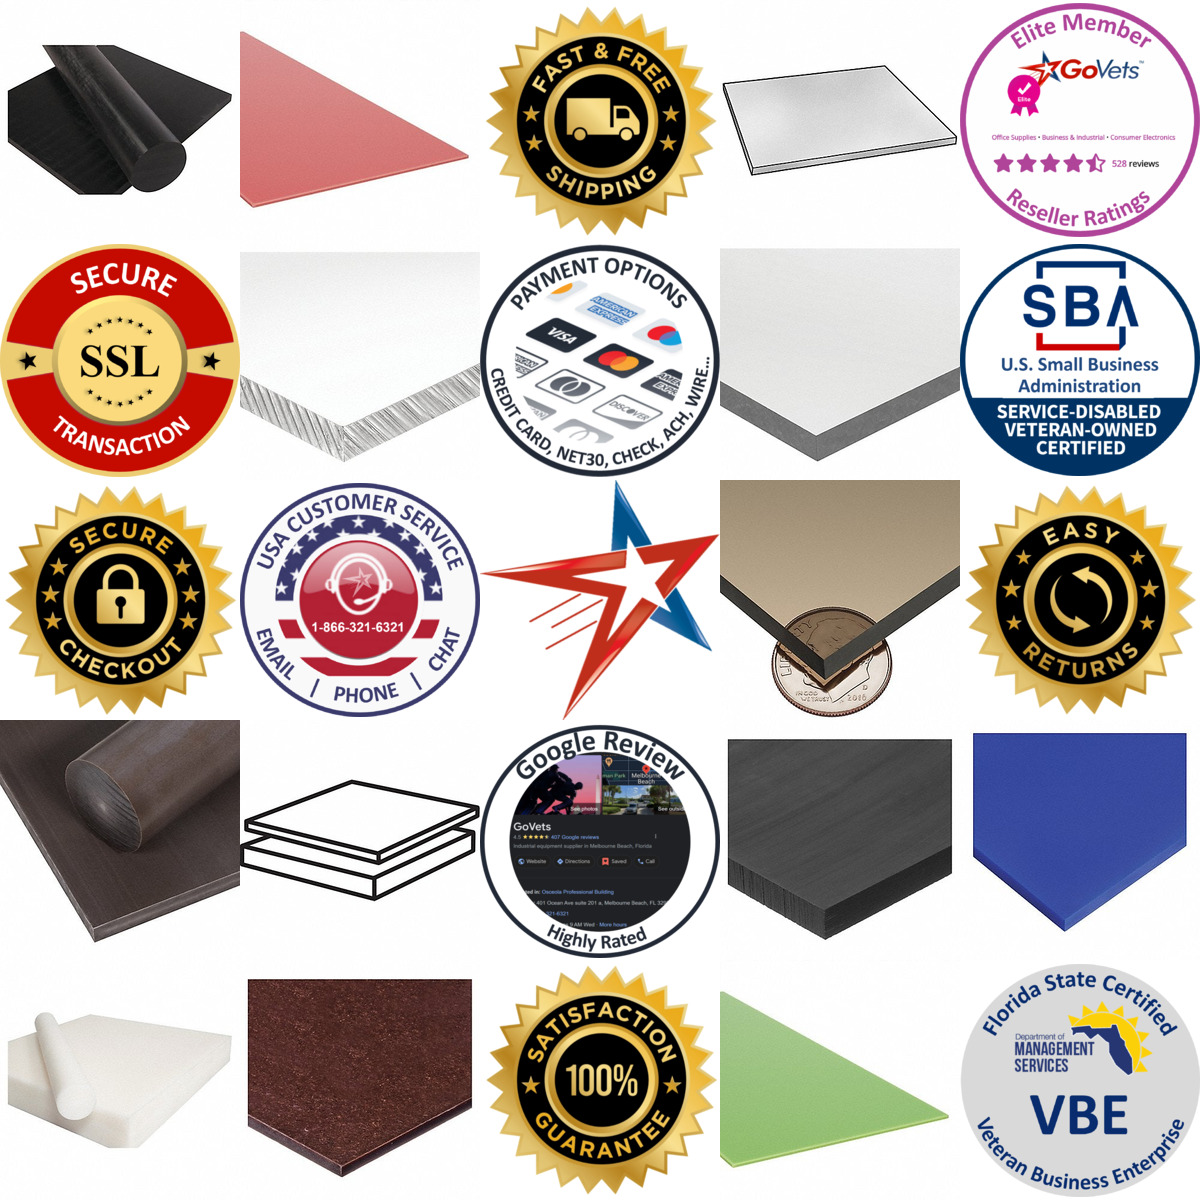 A selection of Plastic Sheets products on GoVets